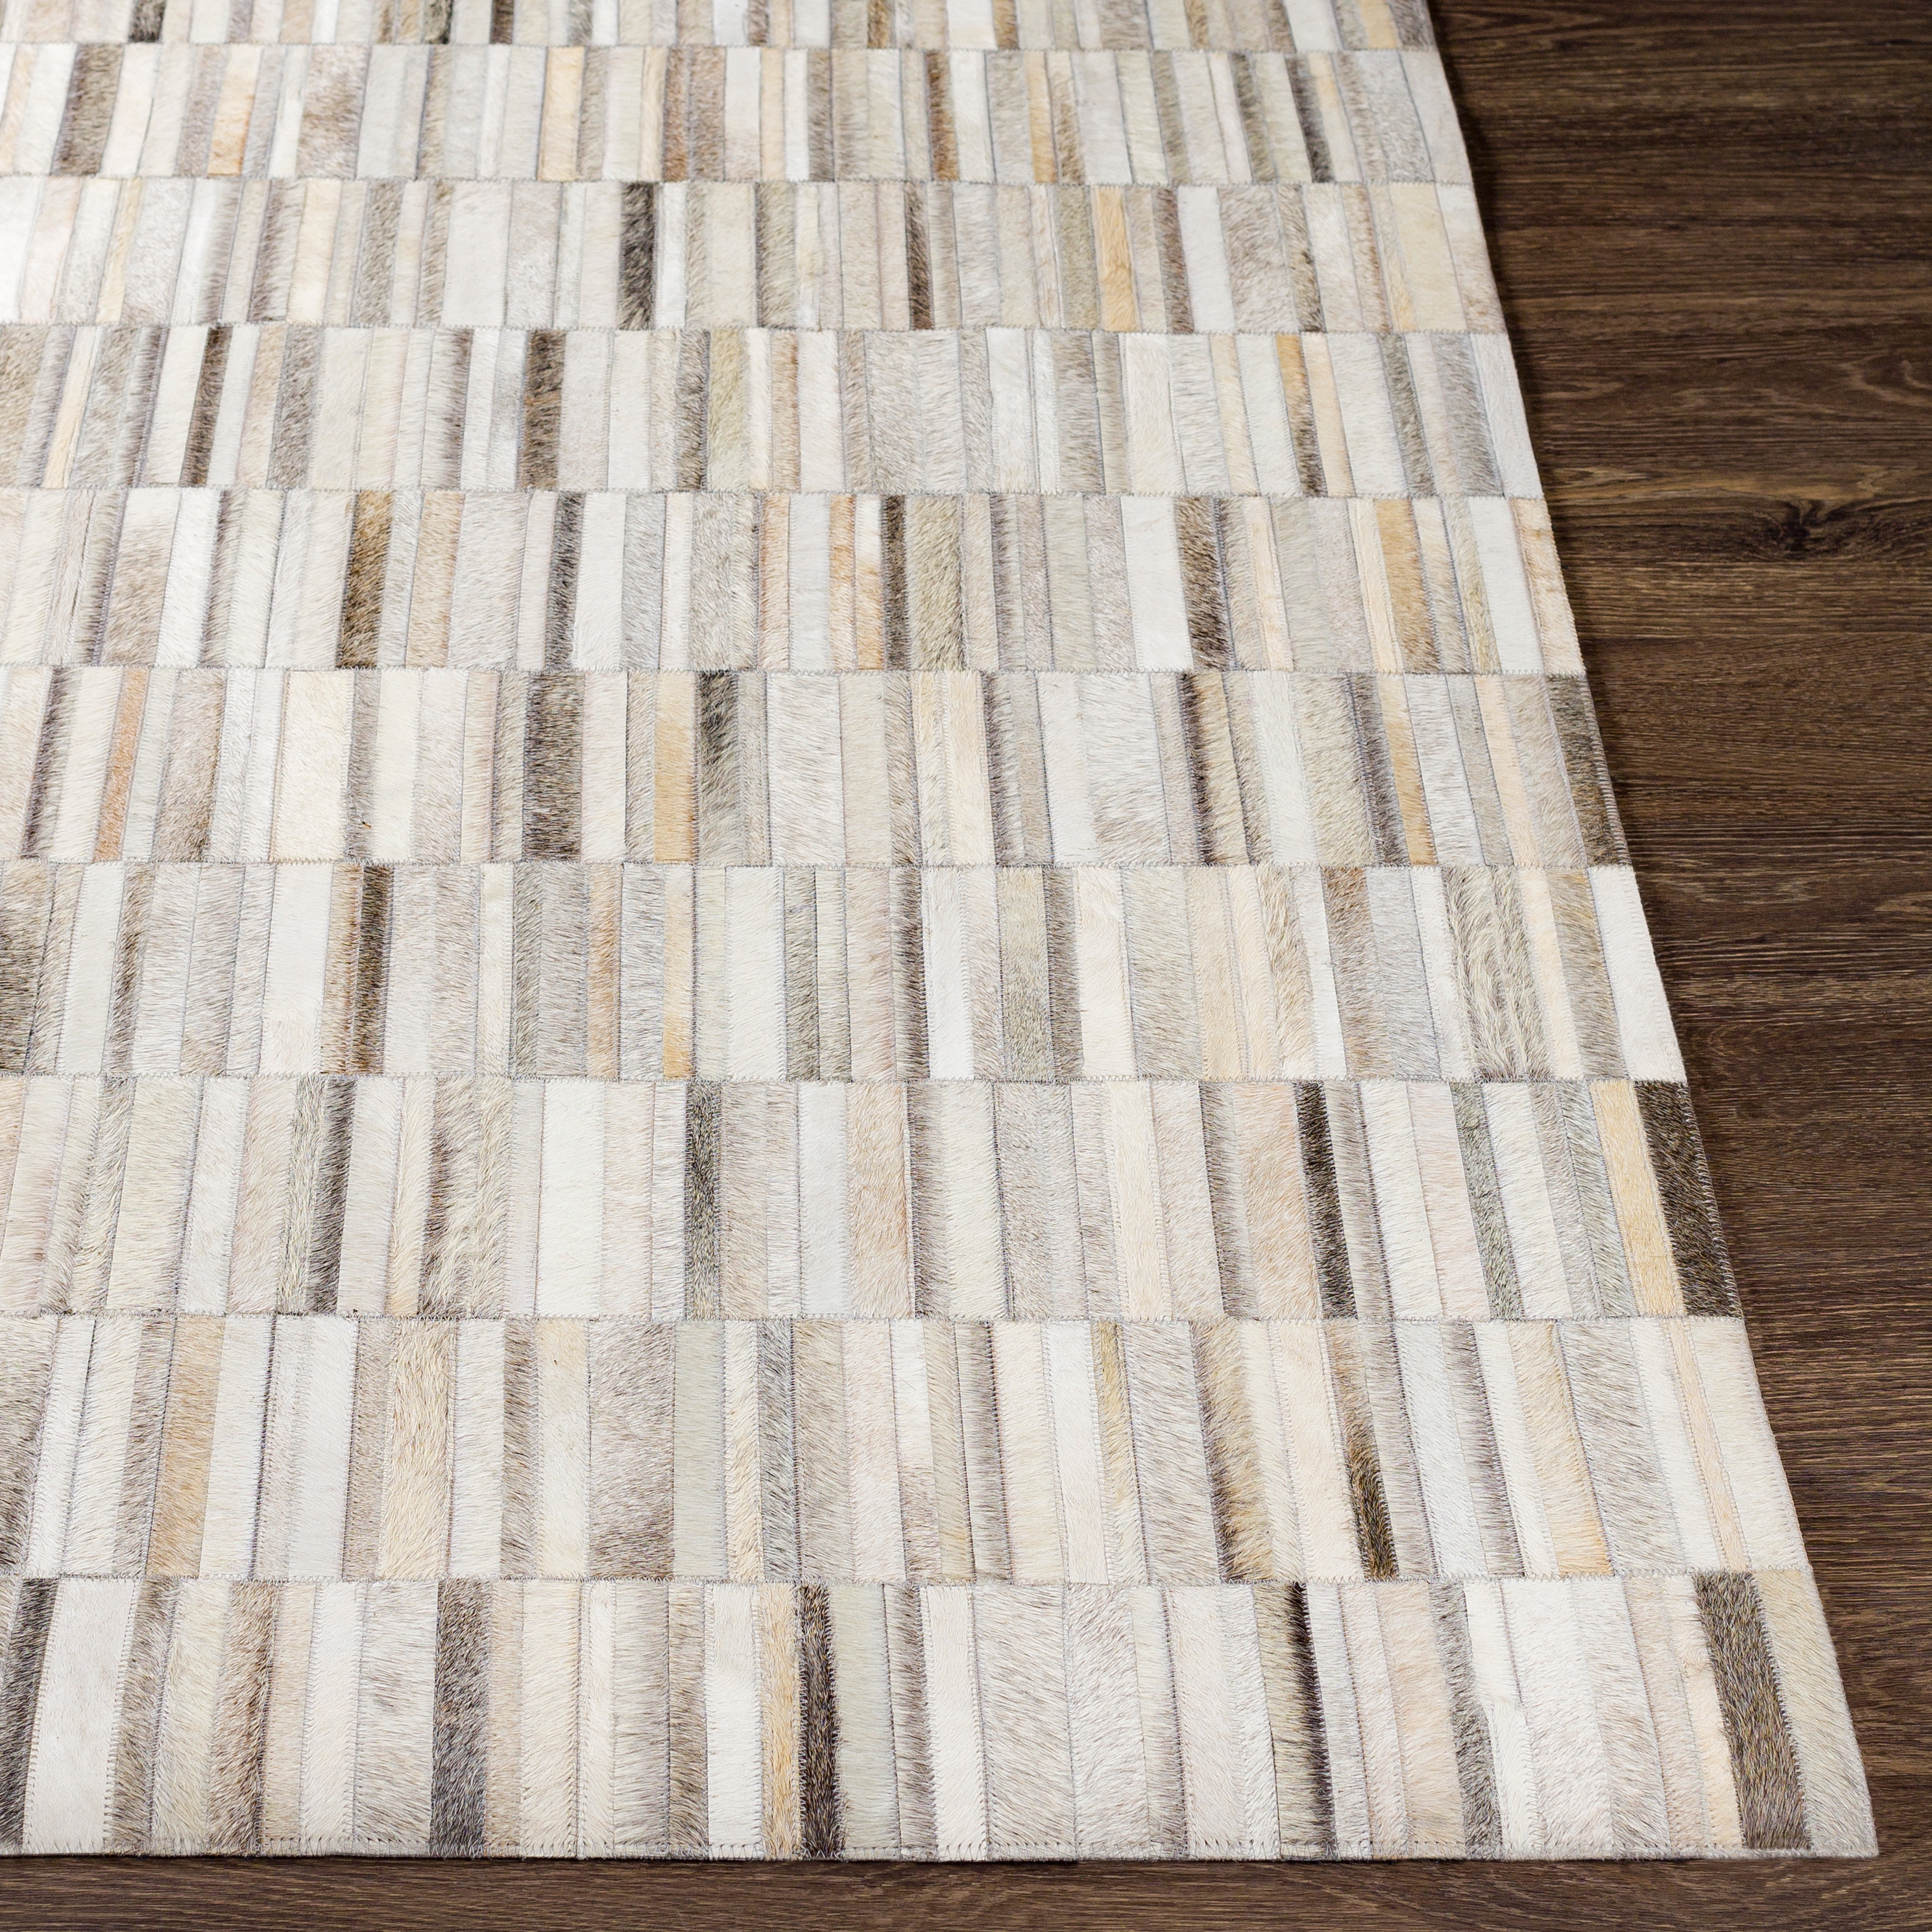 Outback Rug, 2' x 3' - Image 1